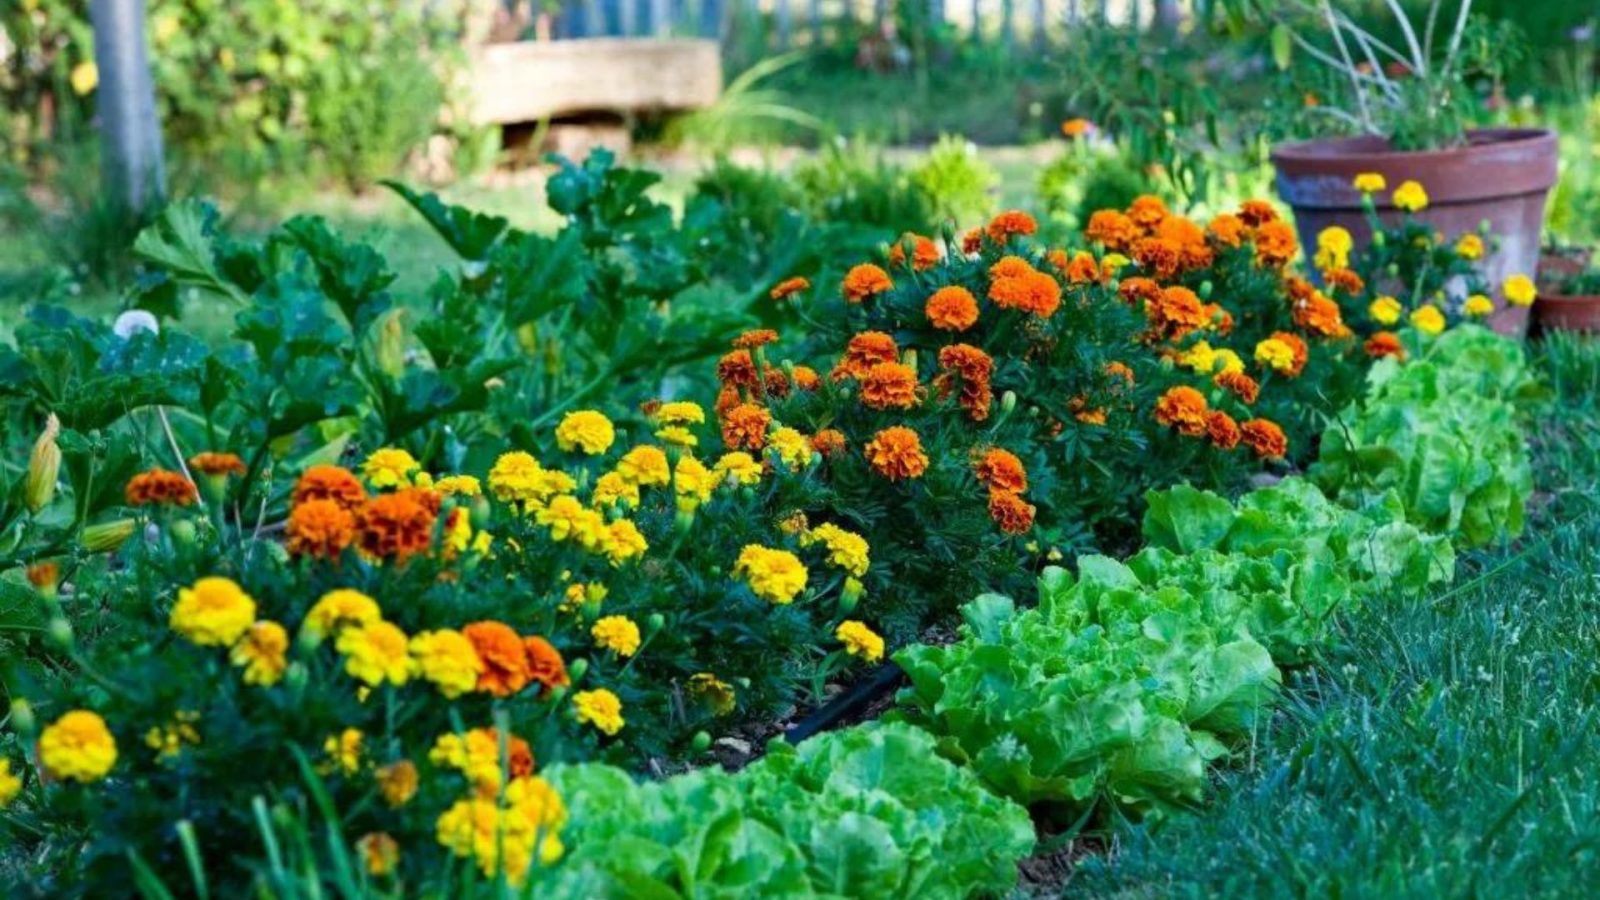 How to plant and care for marigolds